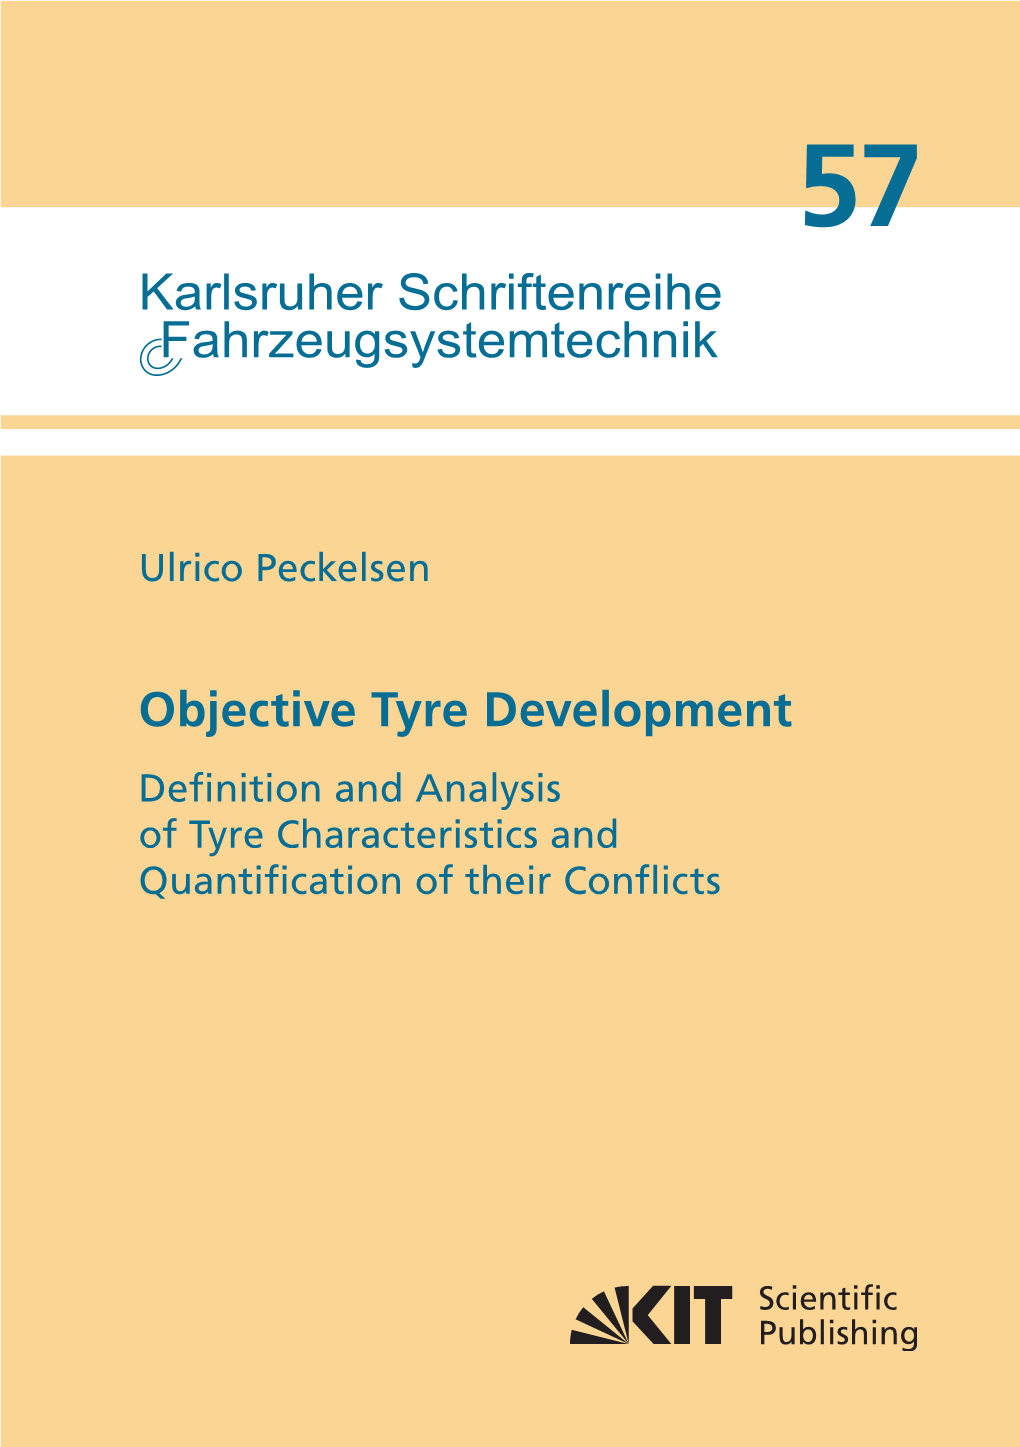 Objective Tyre Development Band 57 Quantification of Their Conflicts of Tyre Characteristics and Analysis and Definition Objective Tyre Development Peckelsen Ulrico